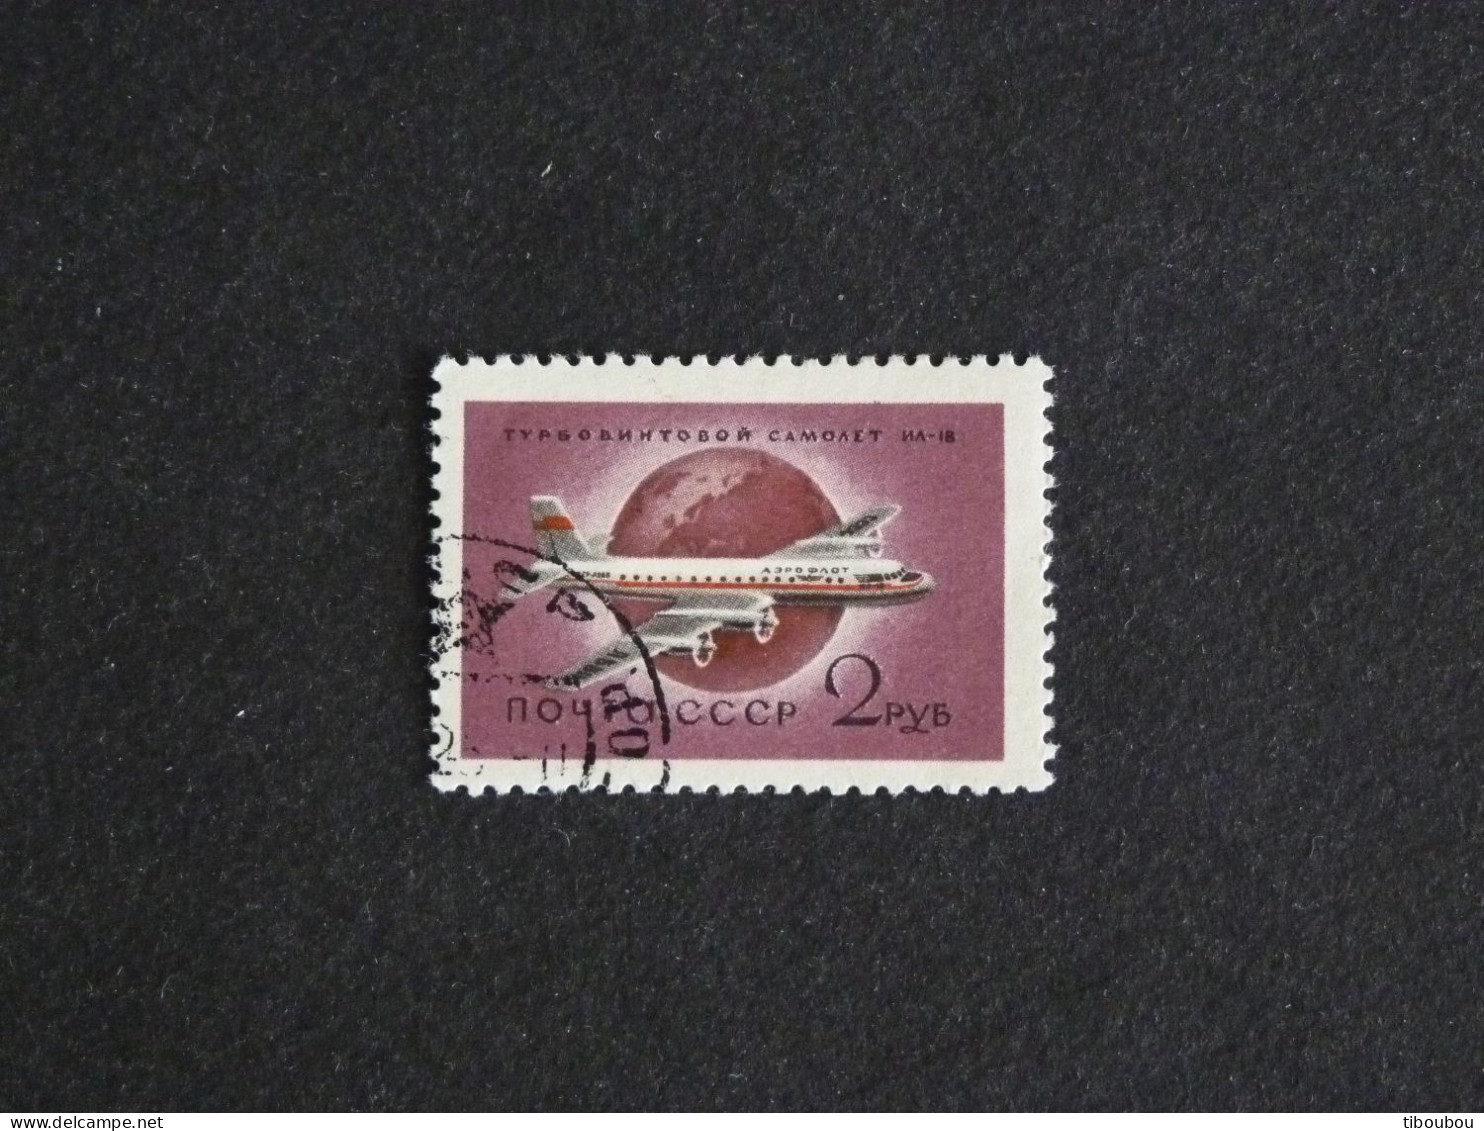 RUSSIE RUSSIA ROSSIJA URSS CCCP YT PA 111 OBLITERE - AVION PLANE IL-18 - Used Stamps